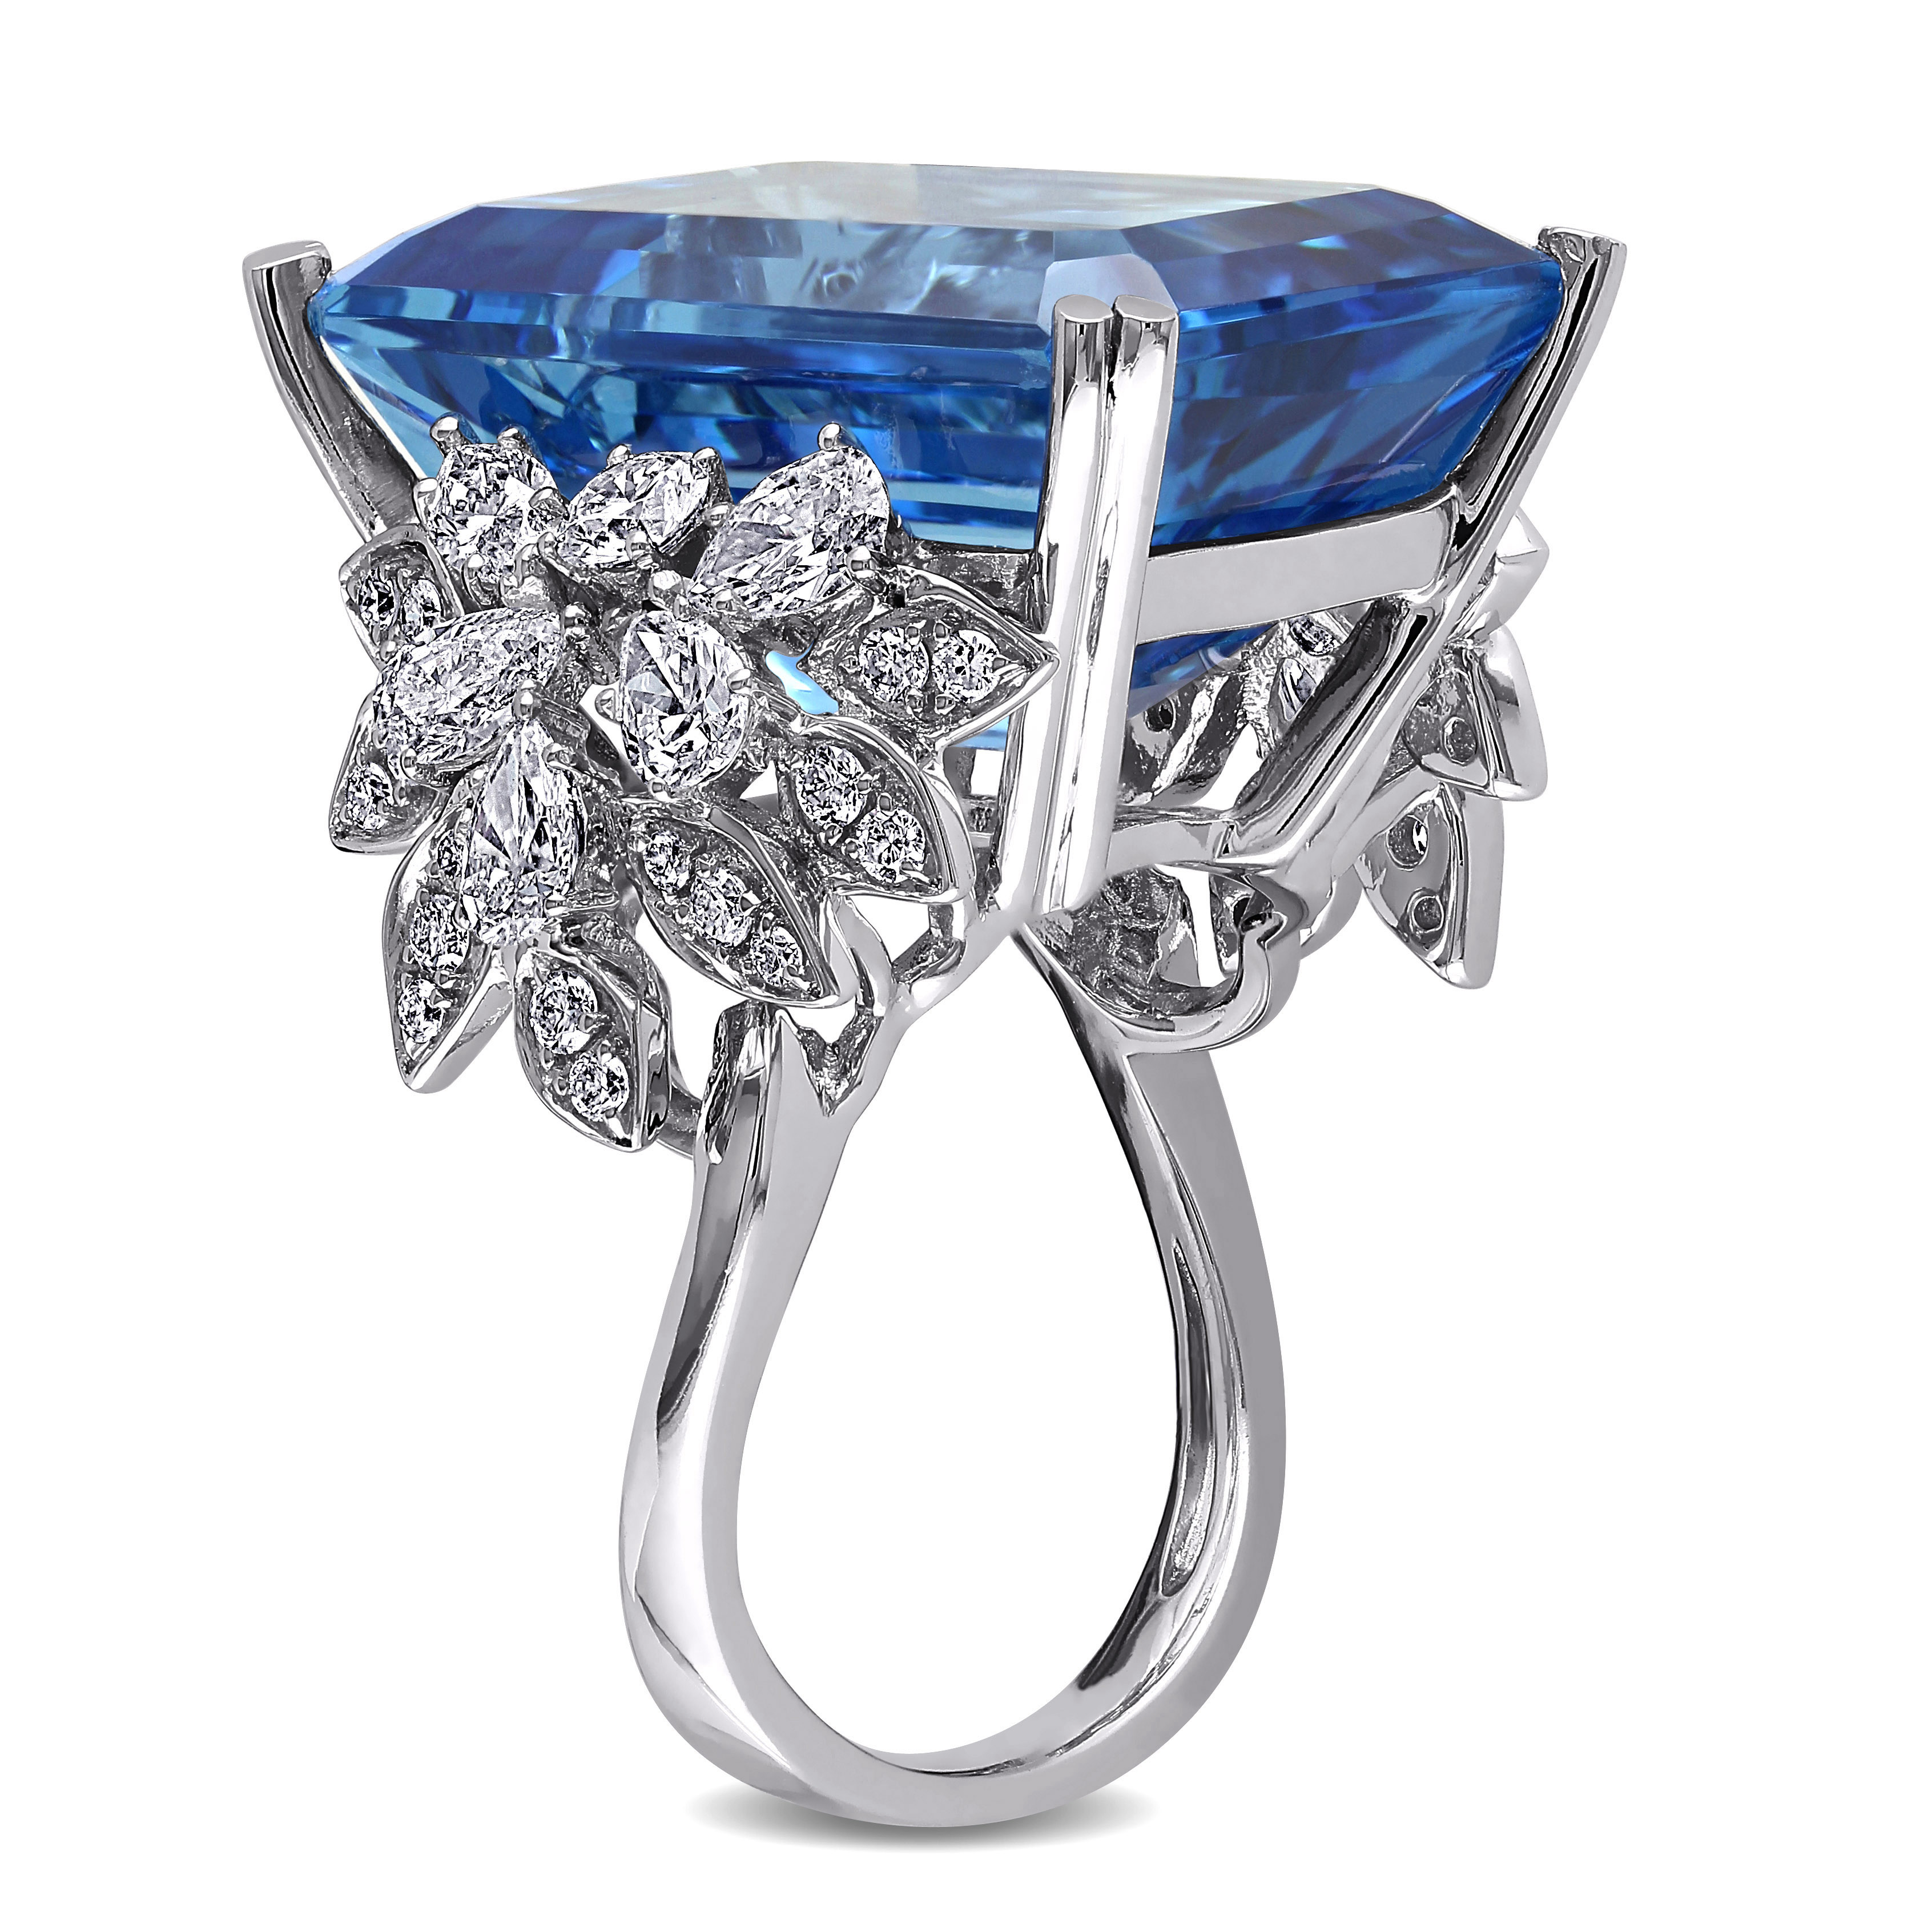 28 1/4 CT TGW Octagon Shaped Swiss-Blue Topaz Ring with 1 3/4 CT TW Diamonds in 14k White Gold